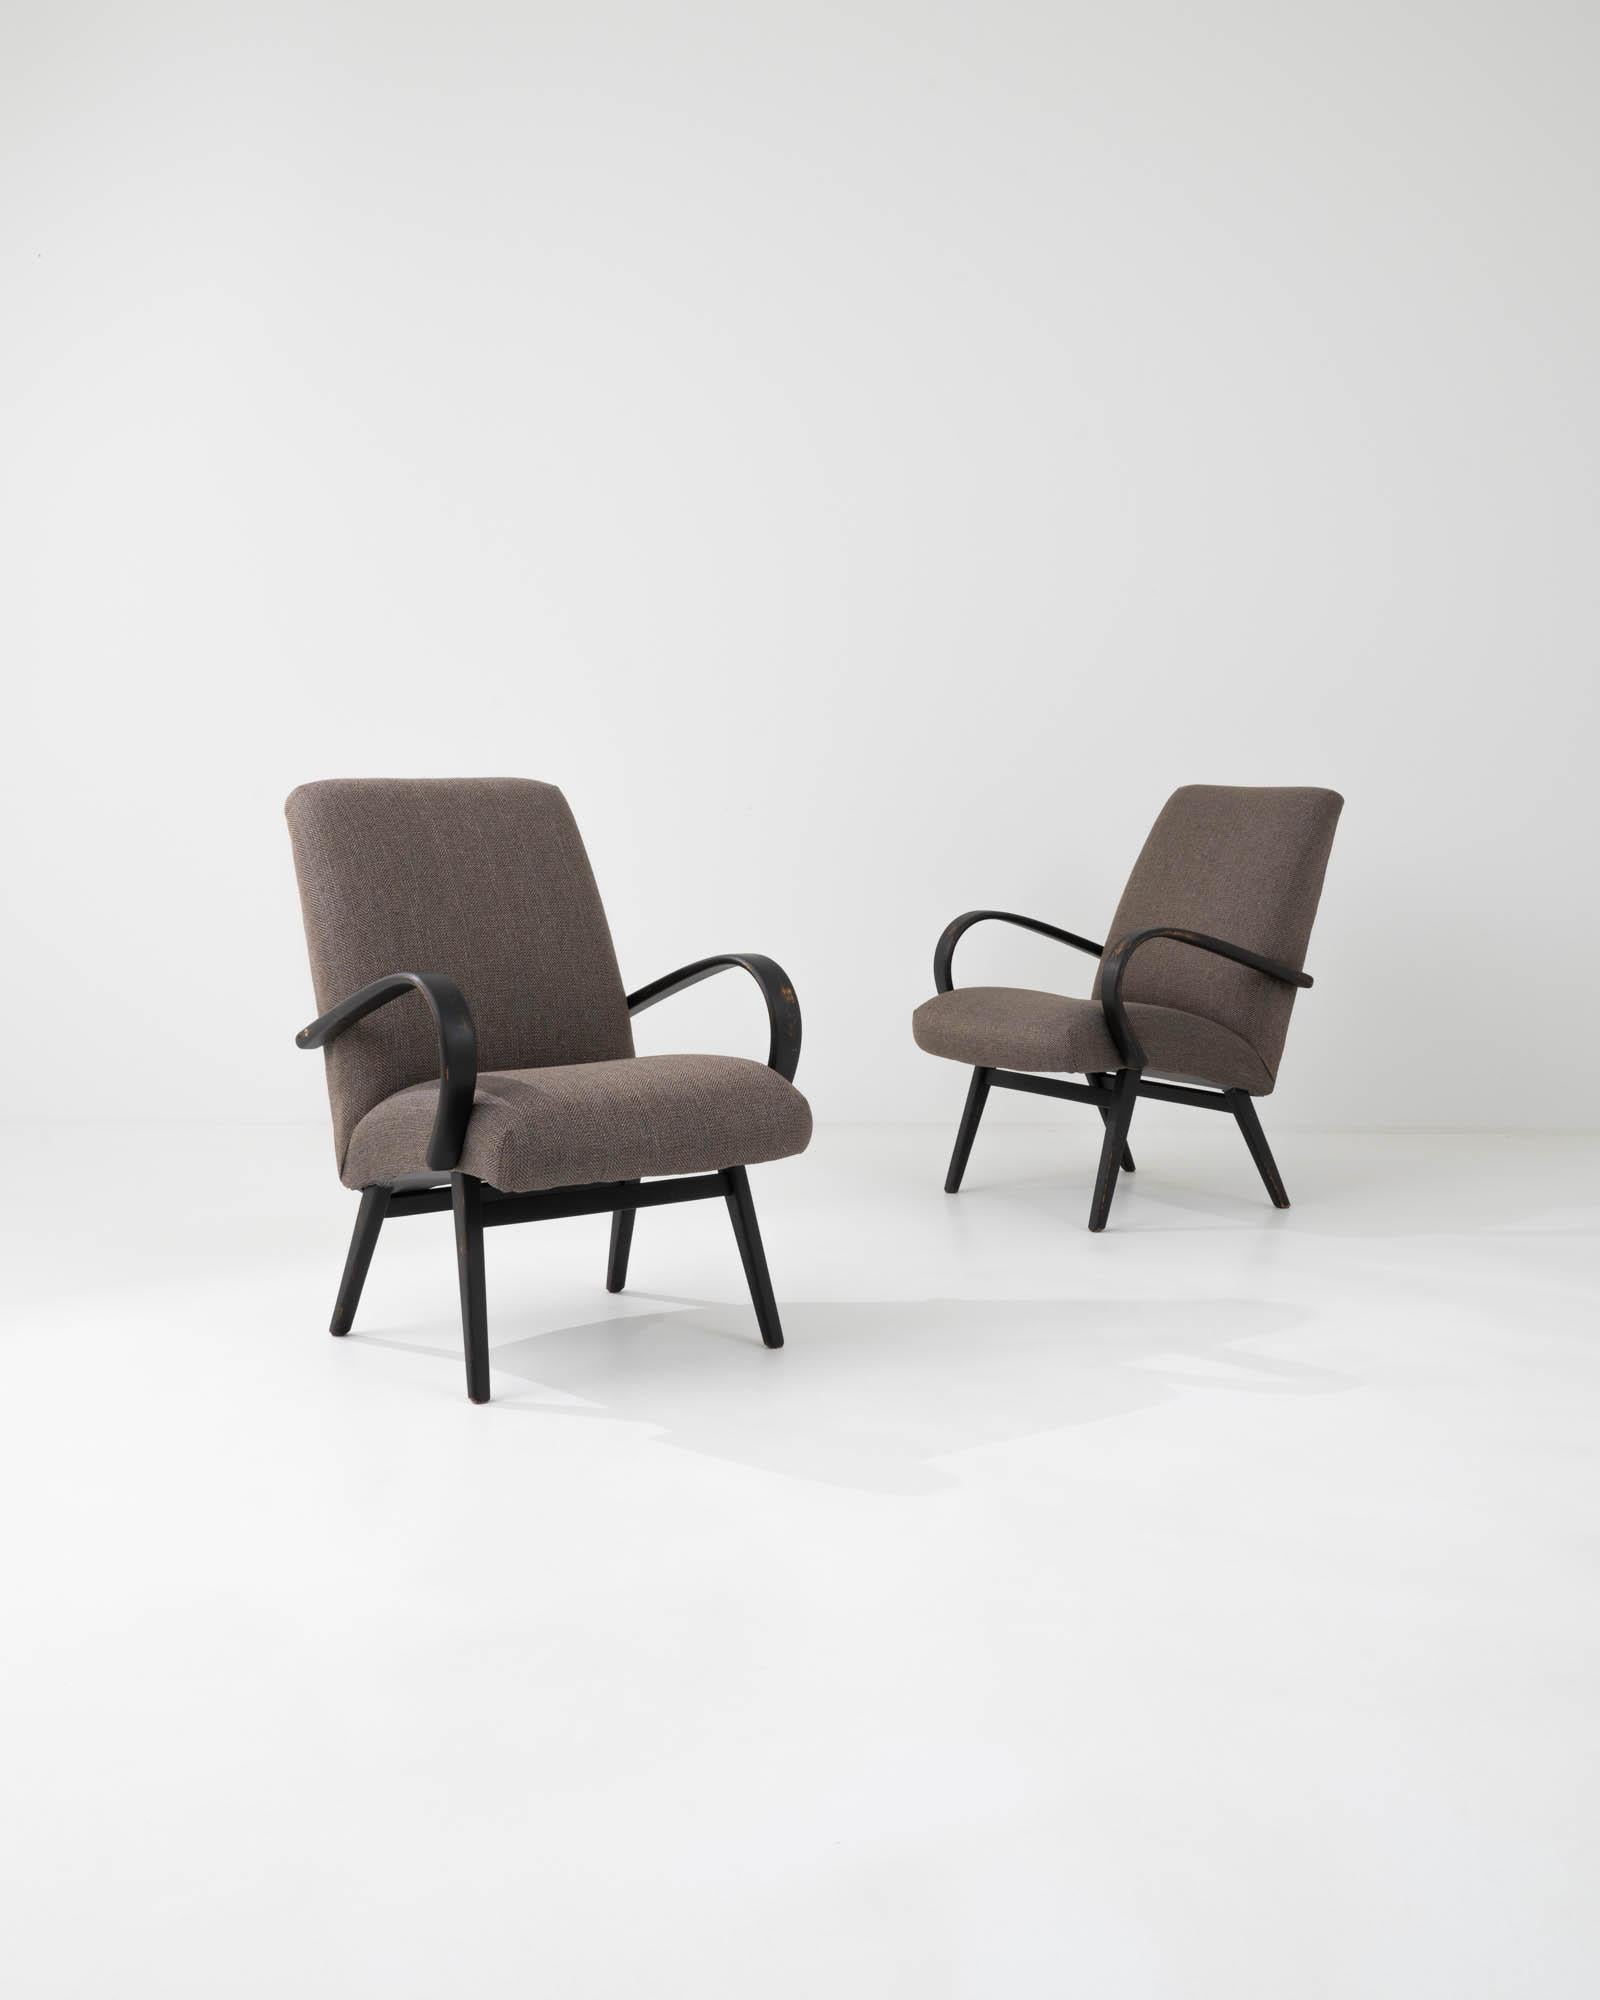 This pair of vintage armchairs is a product from the mind of the renowned industrial designer Jindřich Halabala. Celebrated along with other pieces of postwar Czechia, belonging to collections of museums across Europe they use the characteristic